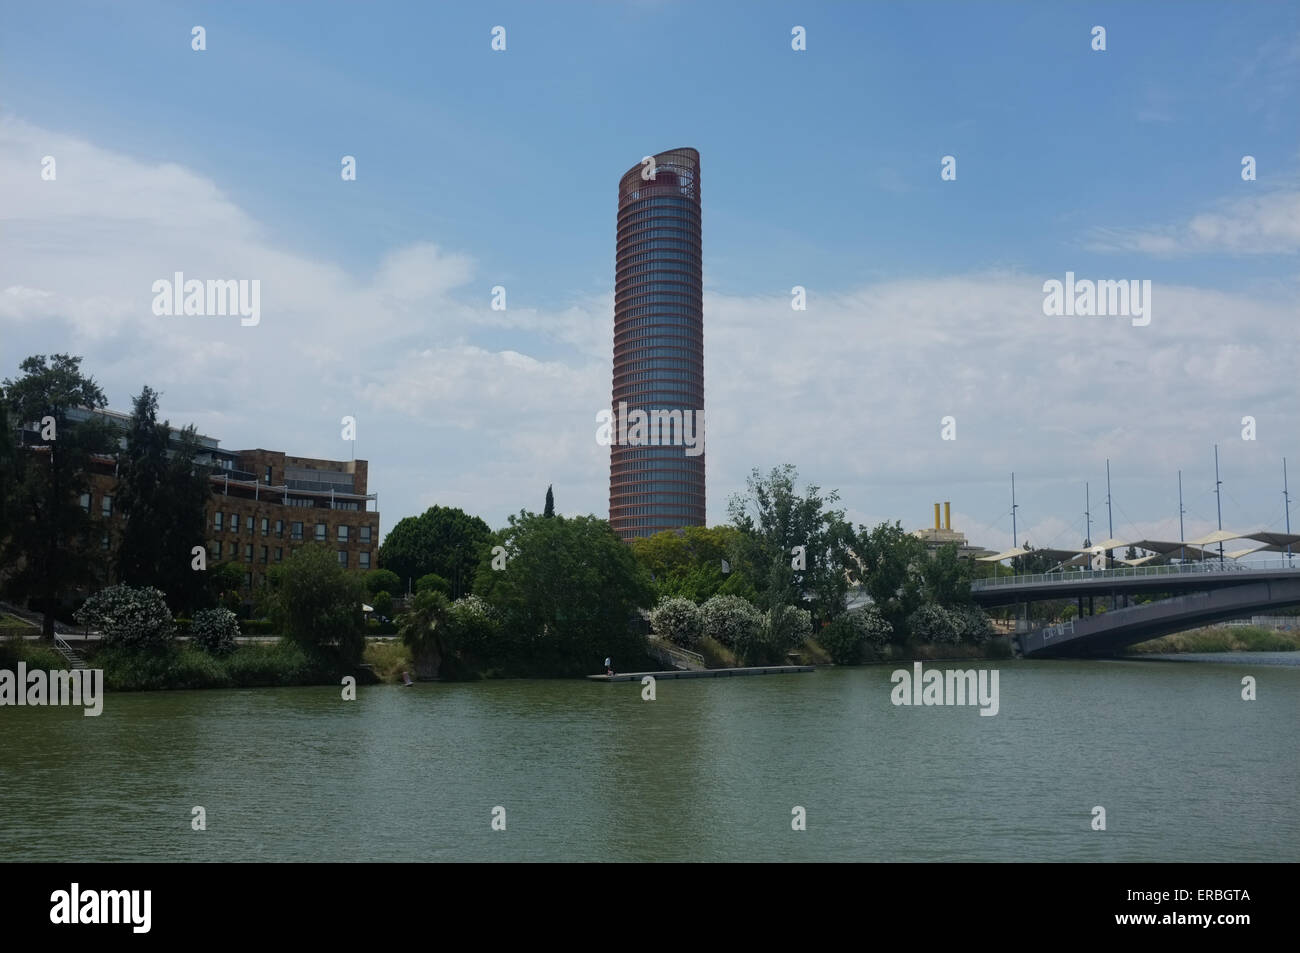 View of Cajasol Tower and Canal de Alfonso Xlll in Seville Spain Stock Photo